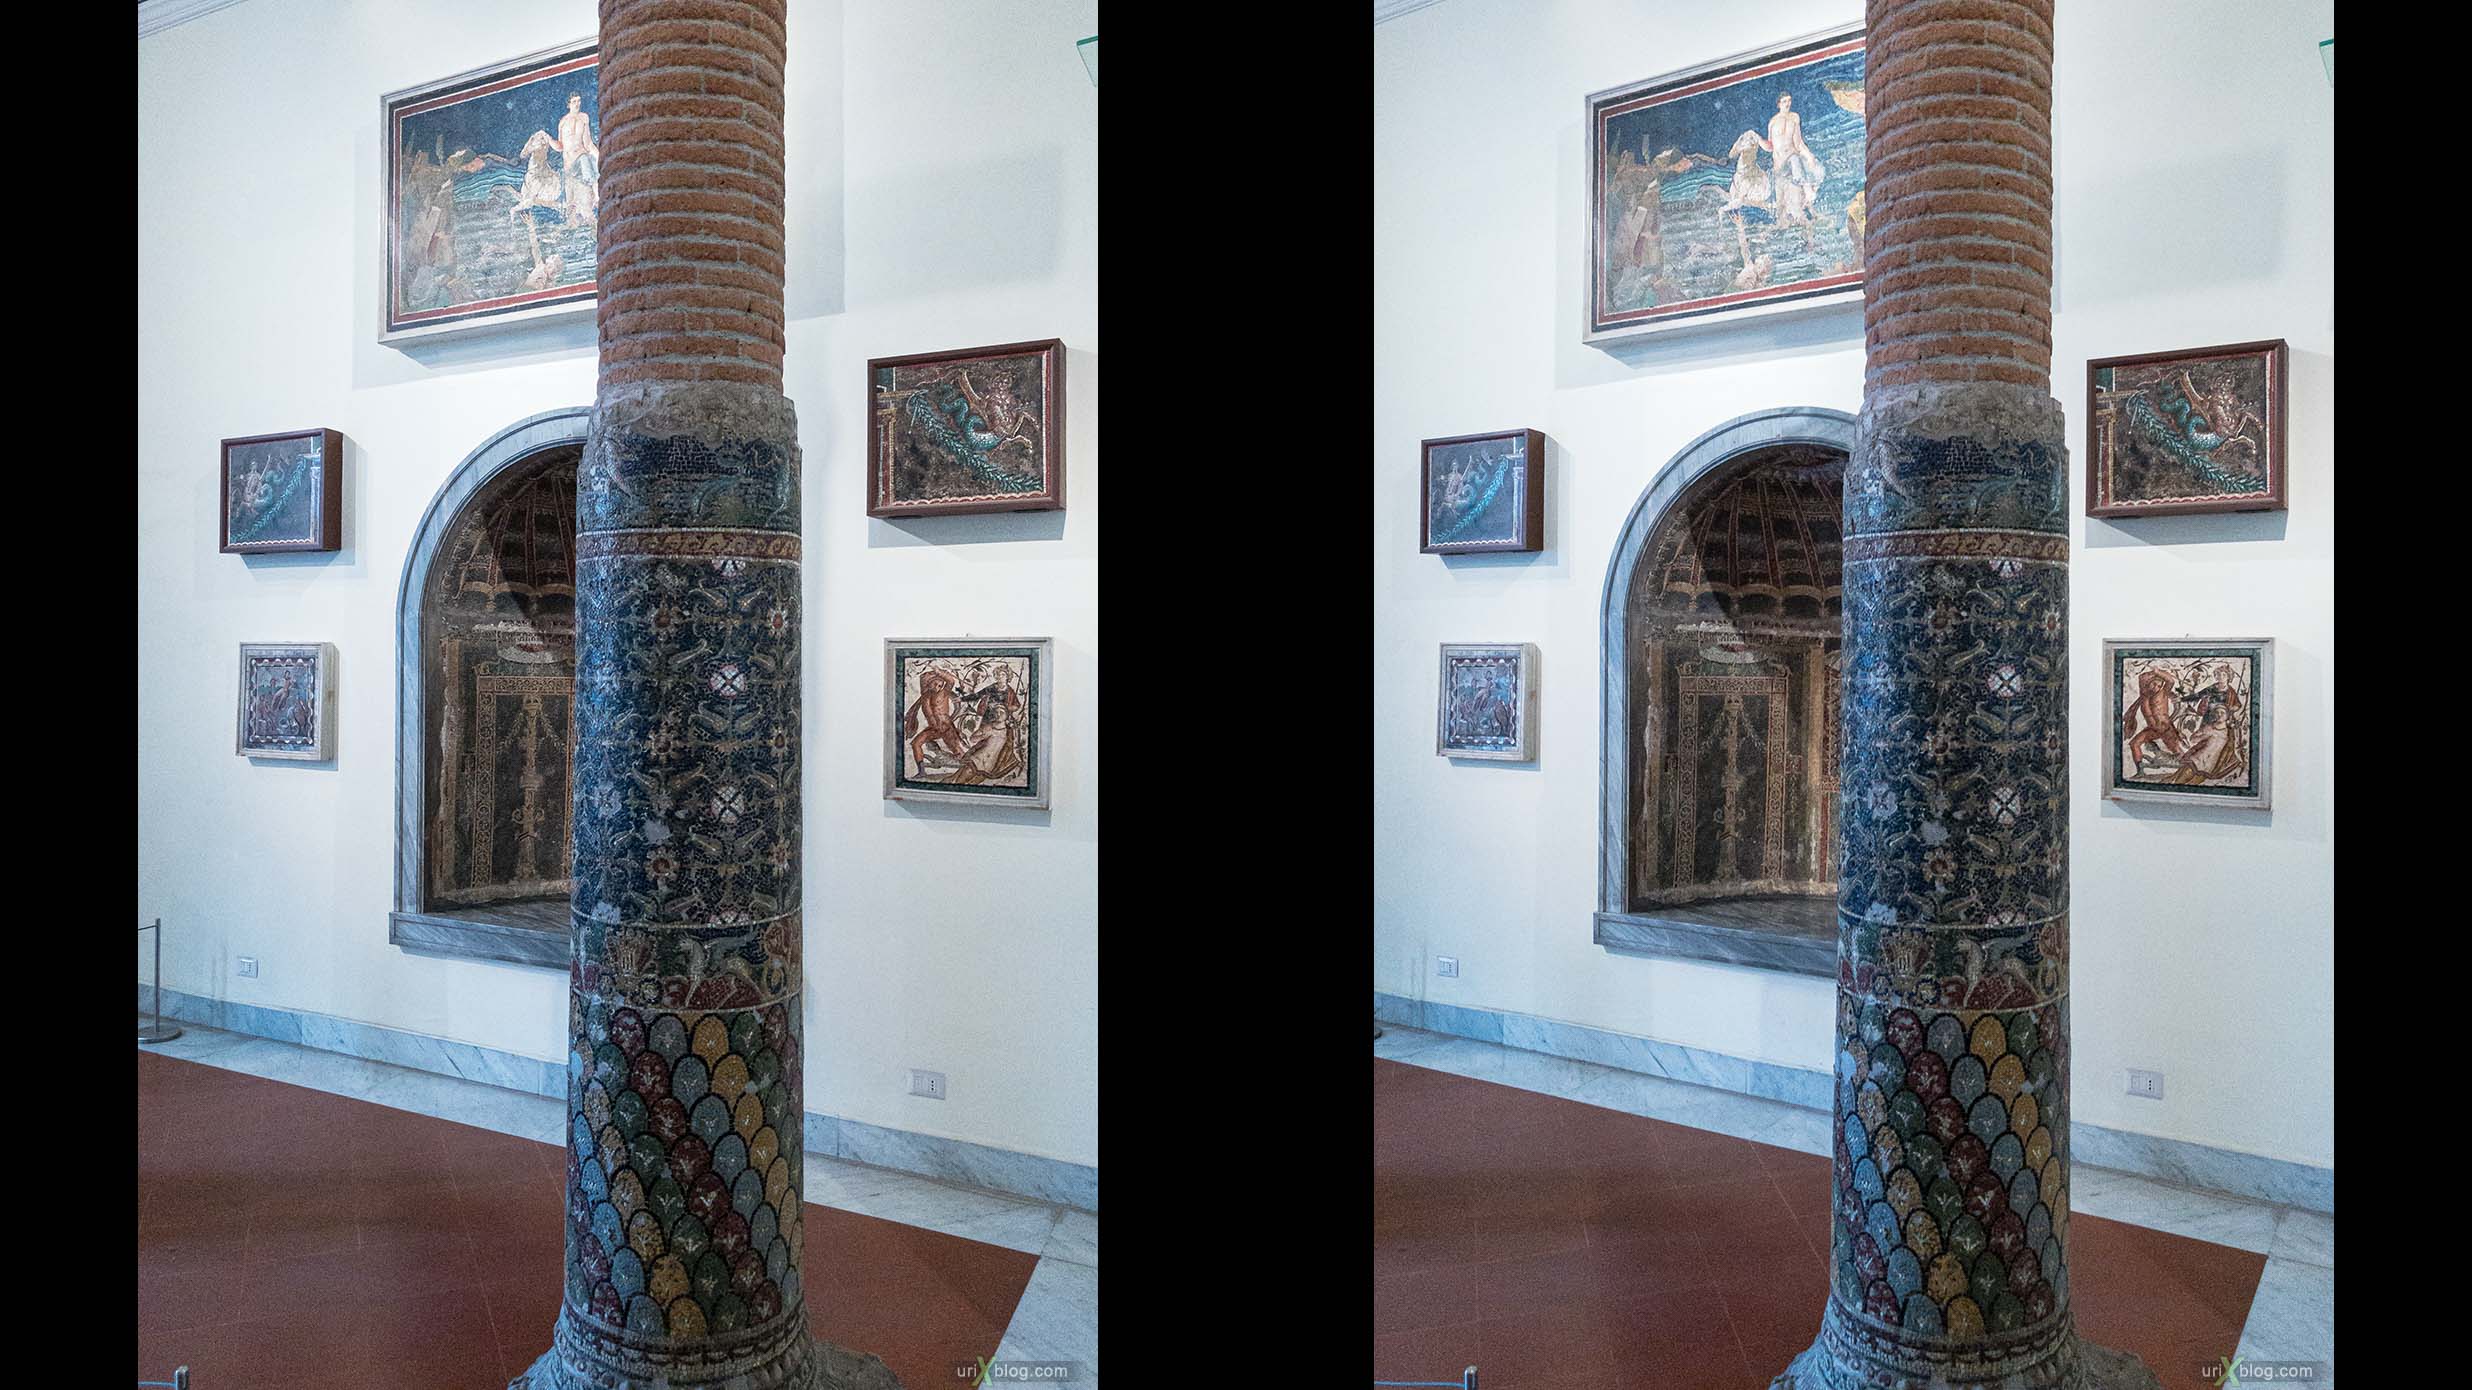 frescoes, mosaics, National Archaeological Museum of Naples, ancient Rome, Pompei, exhibition, Naples, Italy, 3D, stereo pair, cross-eyed, crossview, cross view stereo pair, stereoscopic